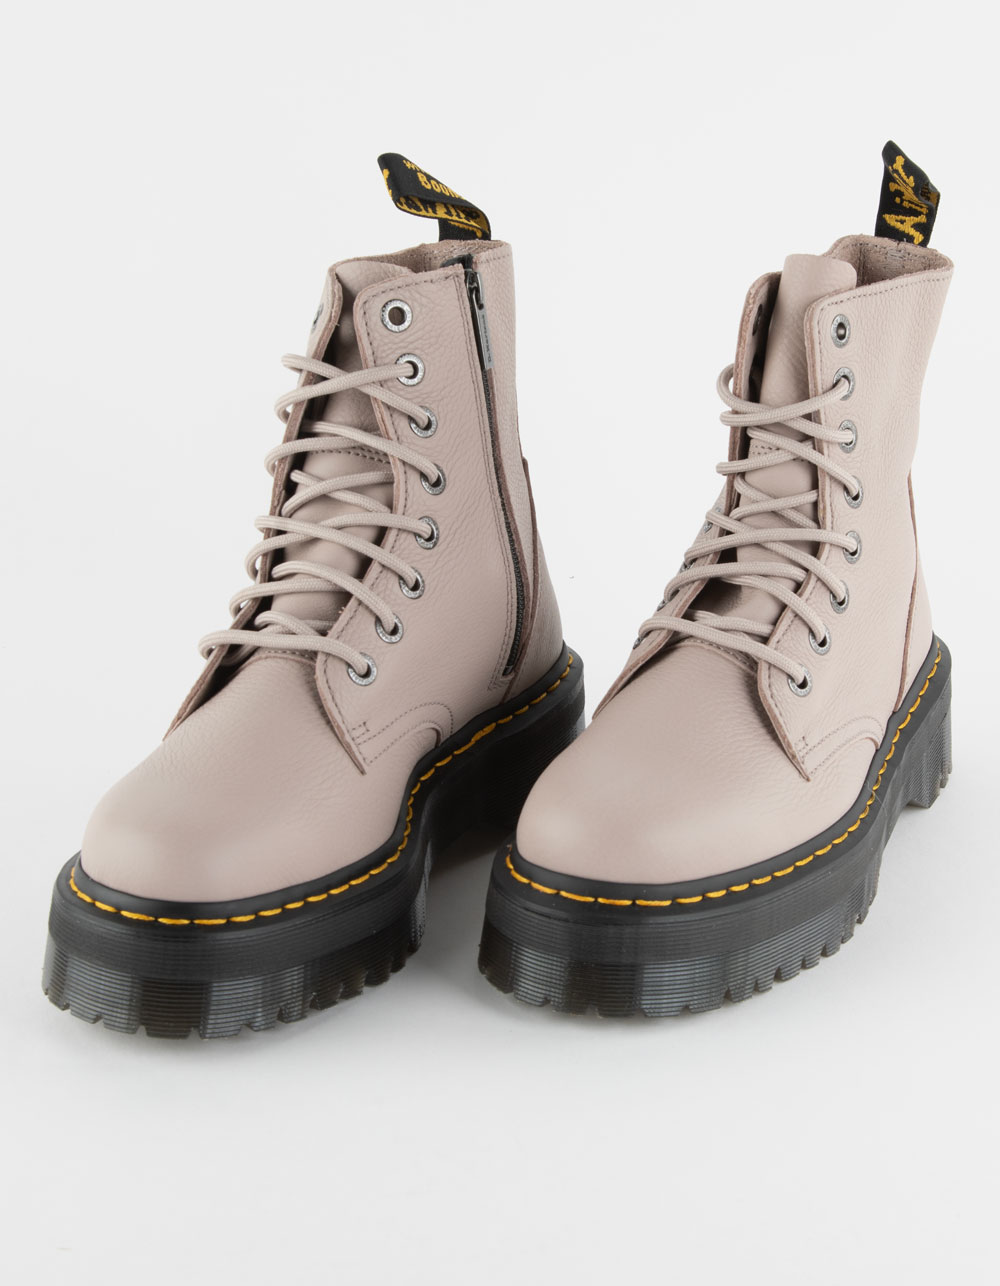 DR. MARTENS Jadon III Lace Up Womens Boots